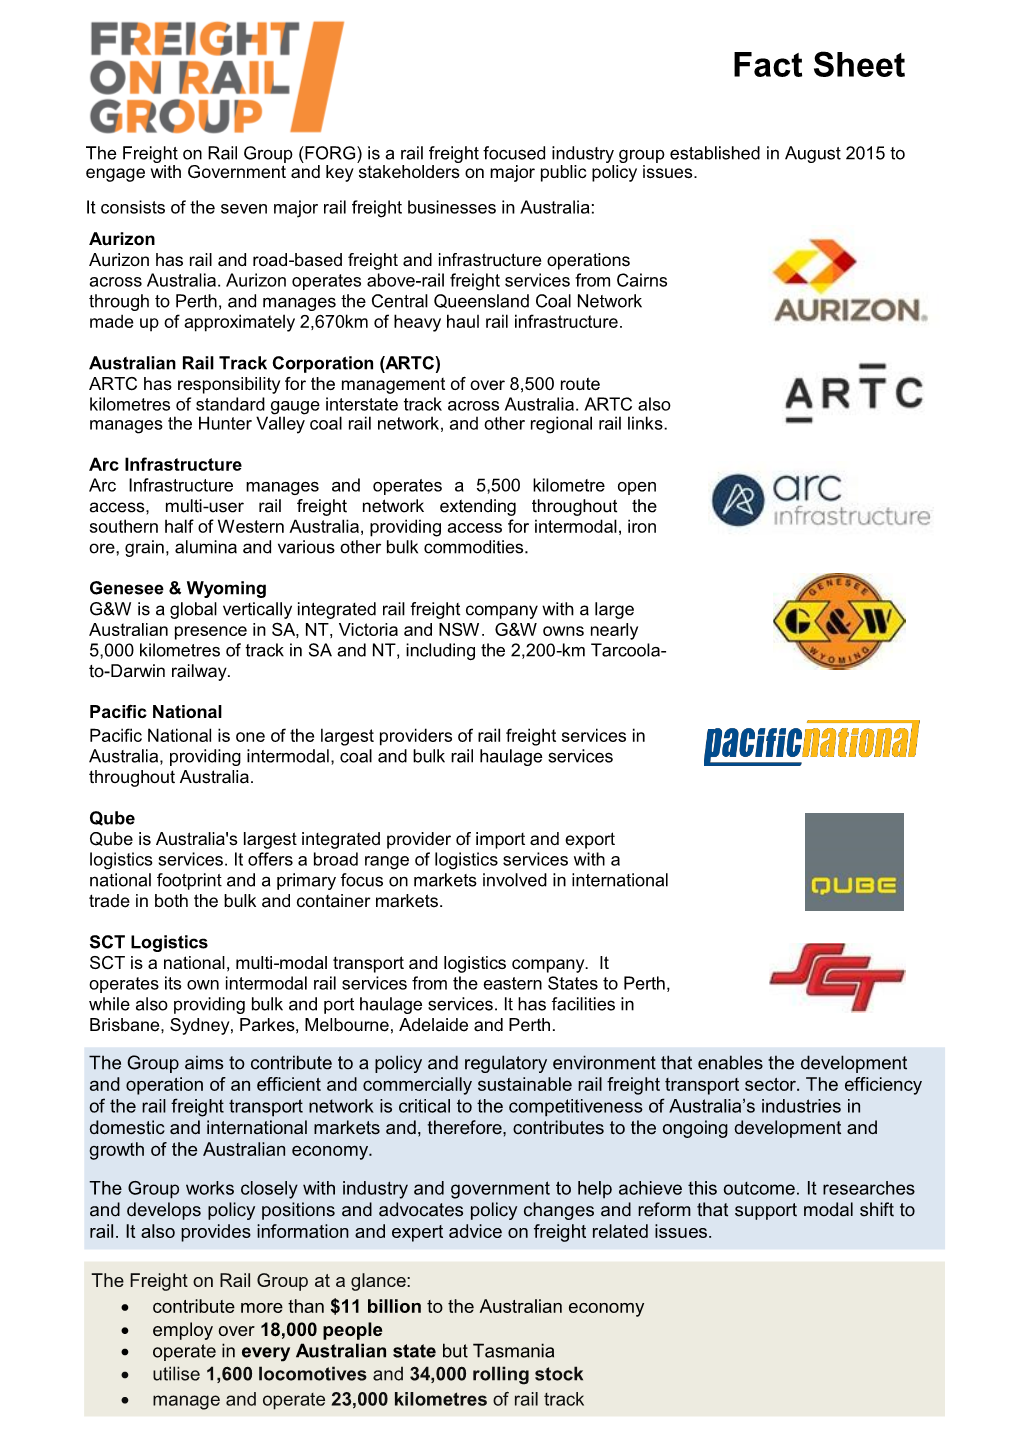 Fact Sheet – Freight on Rail Group